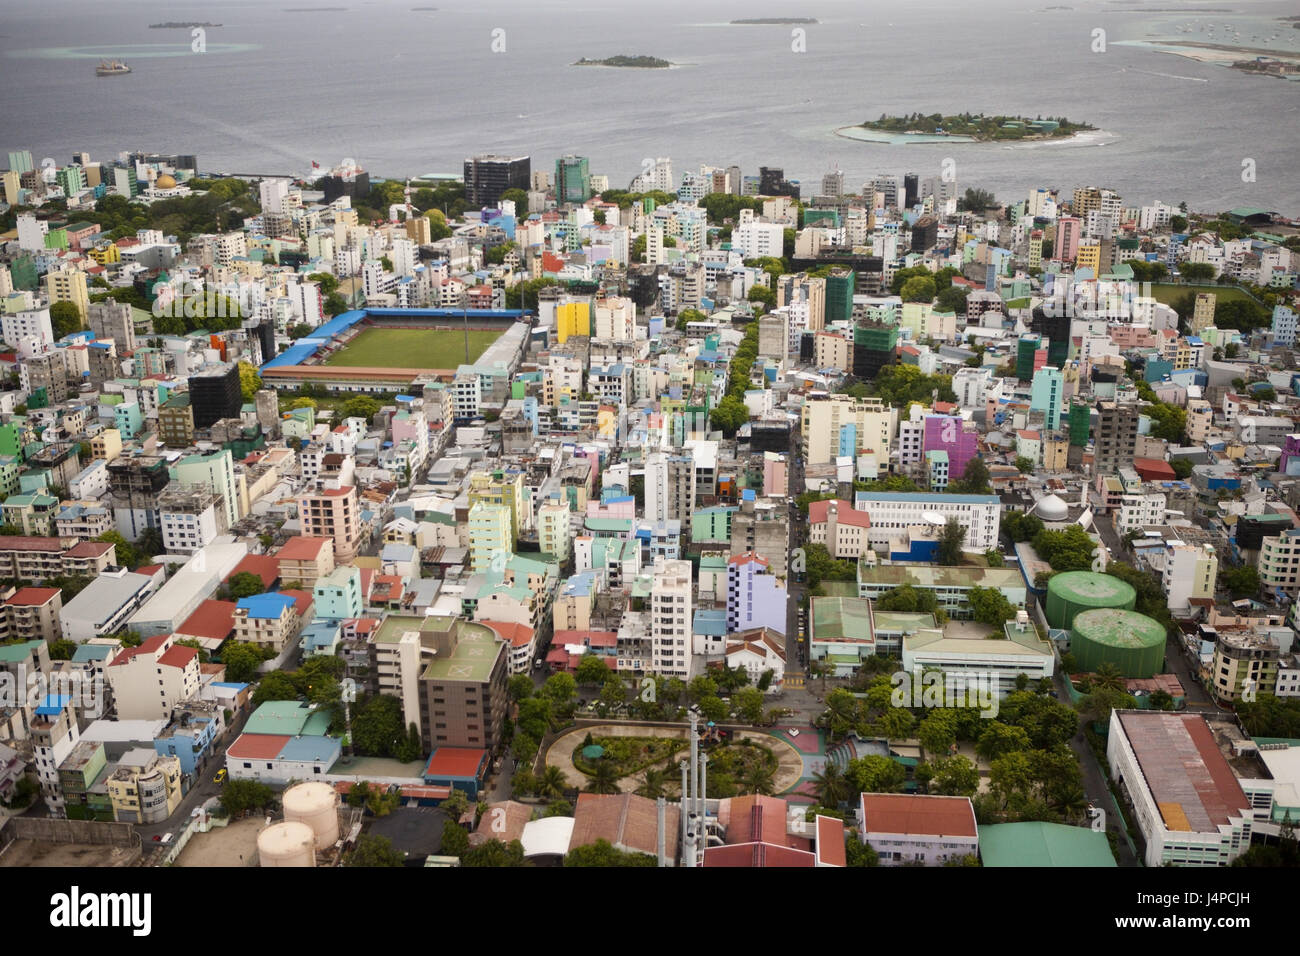 Aerial shots times, capital of the Maldives, the Maldives, the north times atoll, Stock Photo